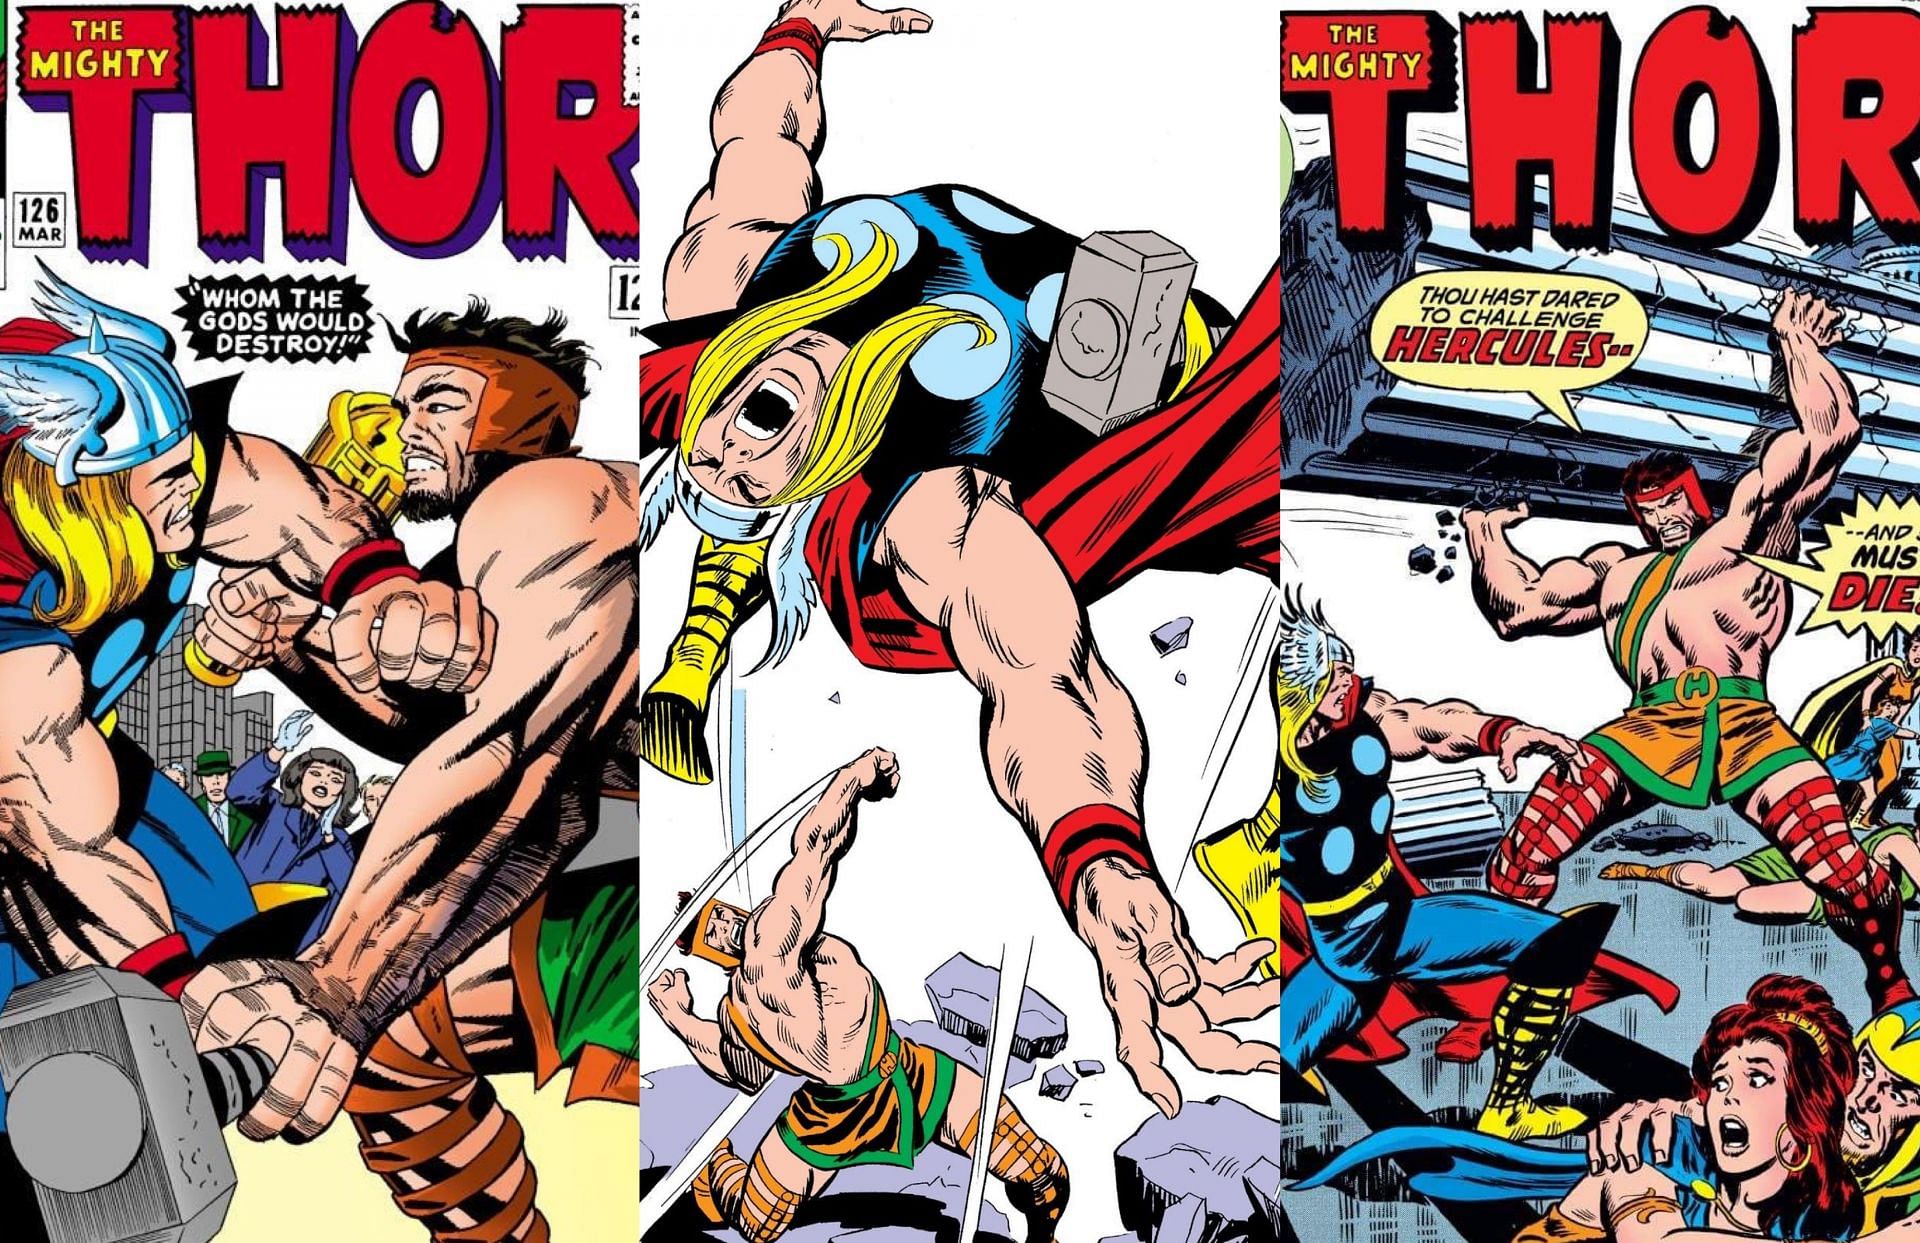 Thor and Hercules fighting in the Marvel comics (Images via Marvel Comics)